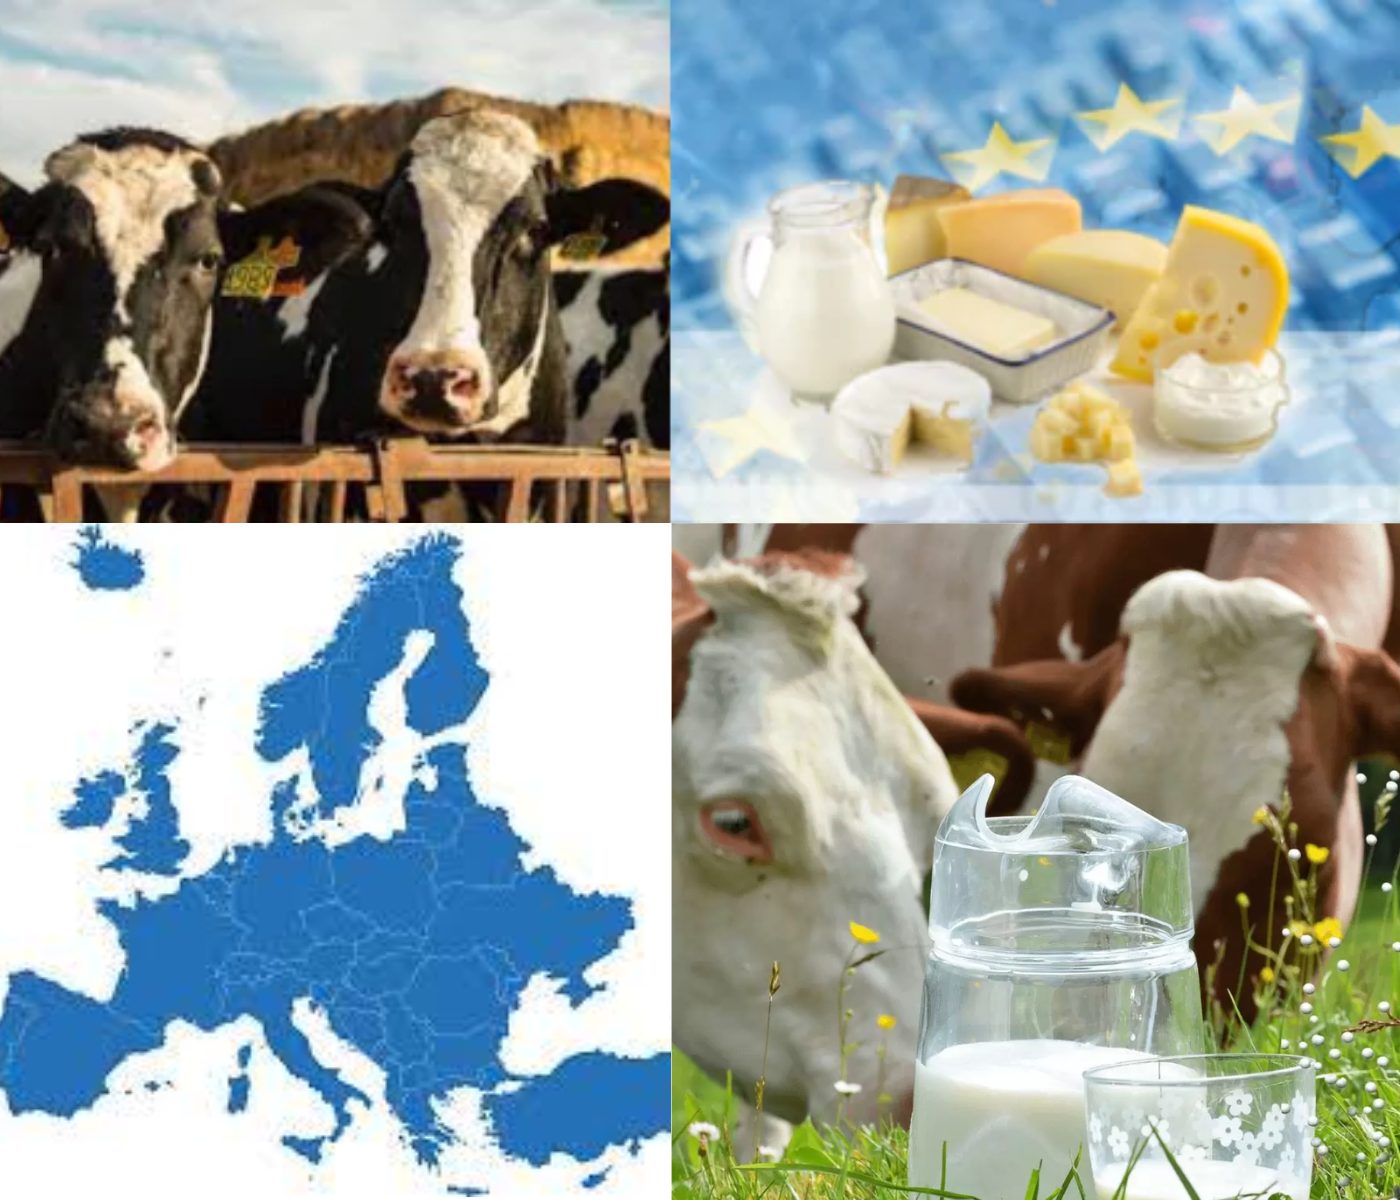 The European model of dairy production